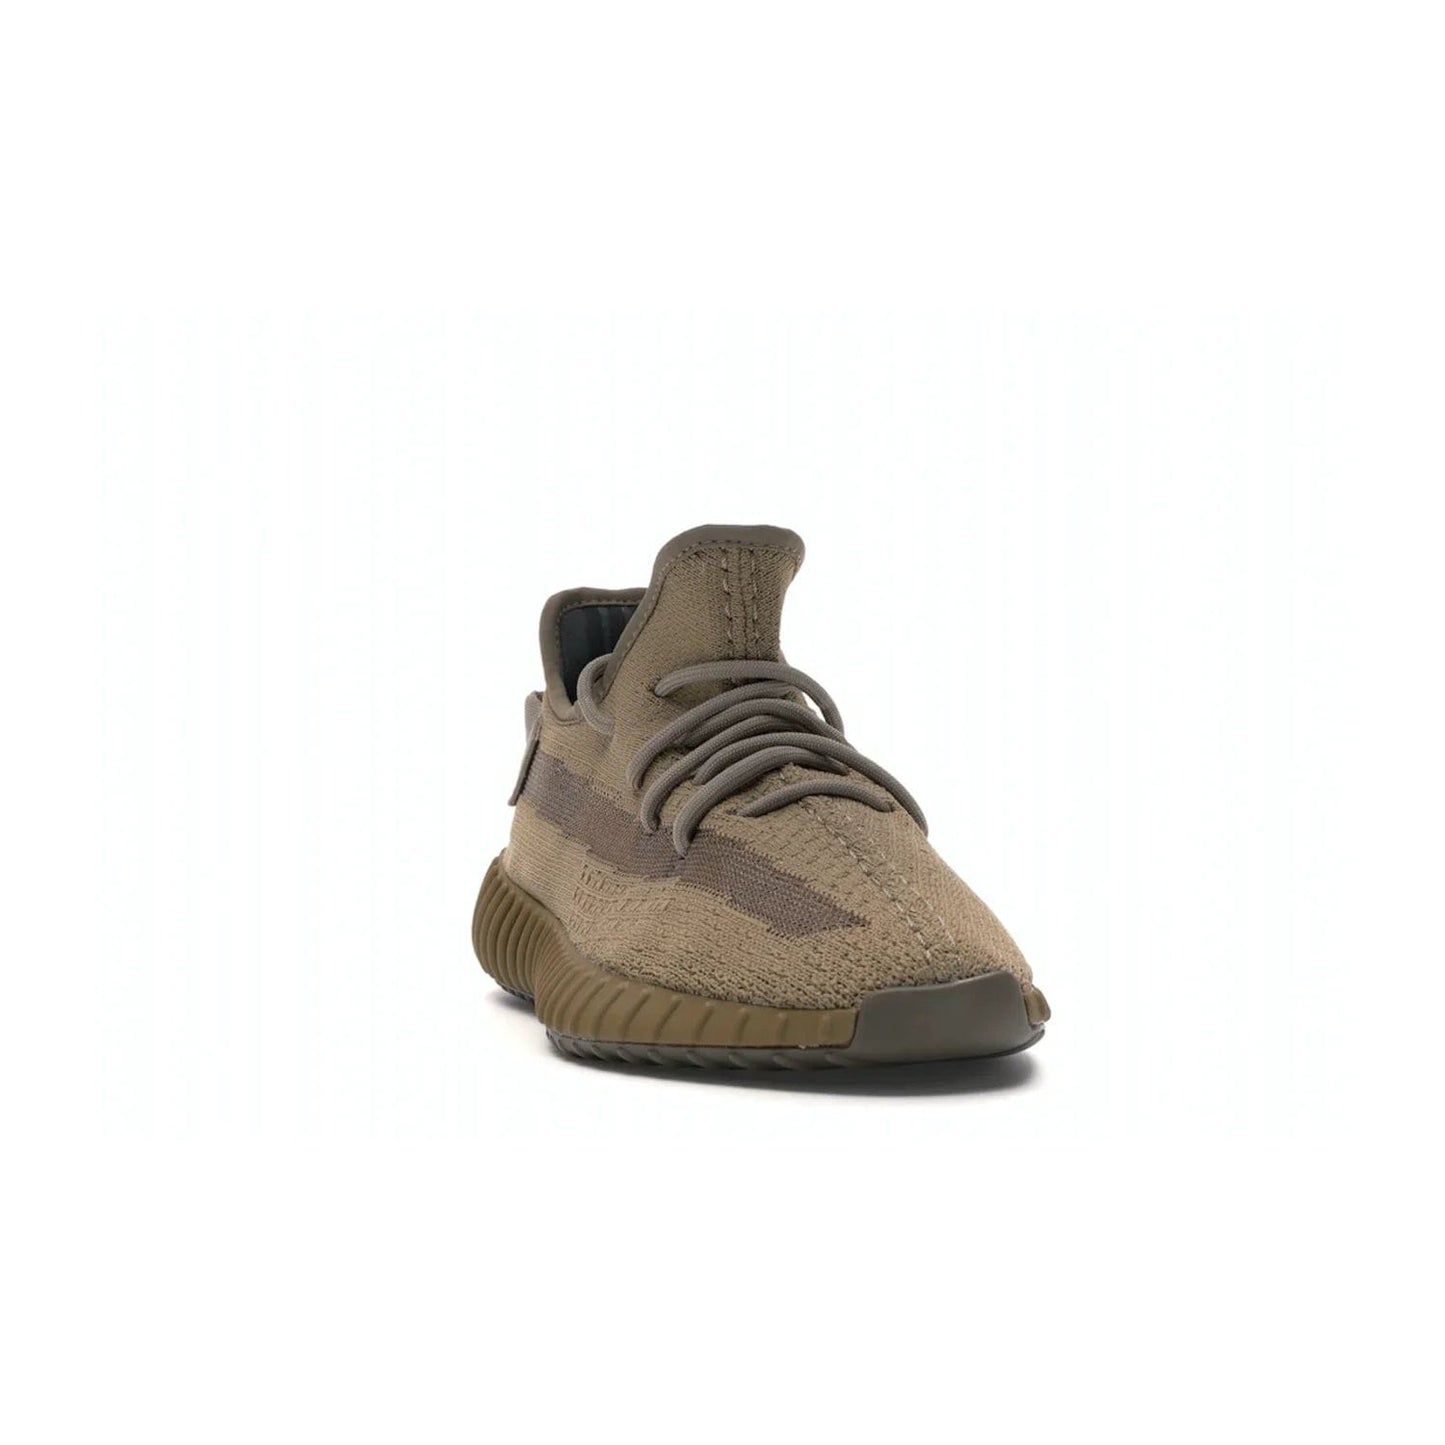 adidas Yeezy Boost 350 V2 Earth - Image 8 - Only at www.BallersClubKickz.com - Abstract style with the adidas Yeezy Boost 350 V2 Earth. Crafted with mud Primeknit upper, mud Boost and interior, and a translucent side stripe. Regional exclusive in Earth/Earth/Earth colorway, these fashionable sneakers released in February 2020. Showcase your style with the Yeezy 350 V2 Earth.